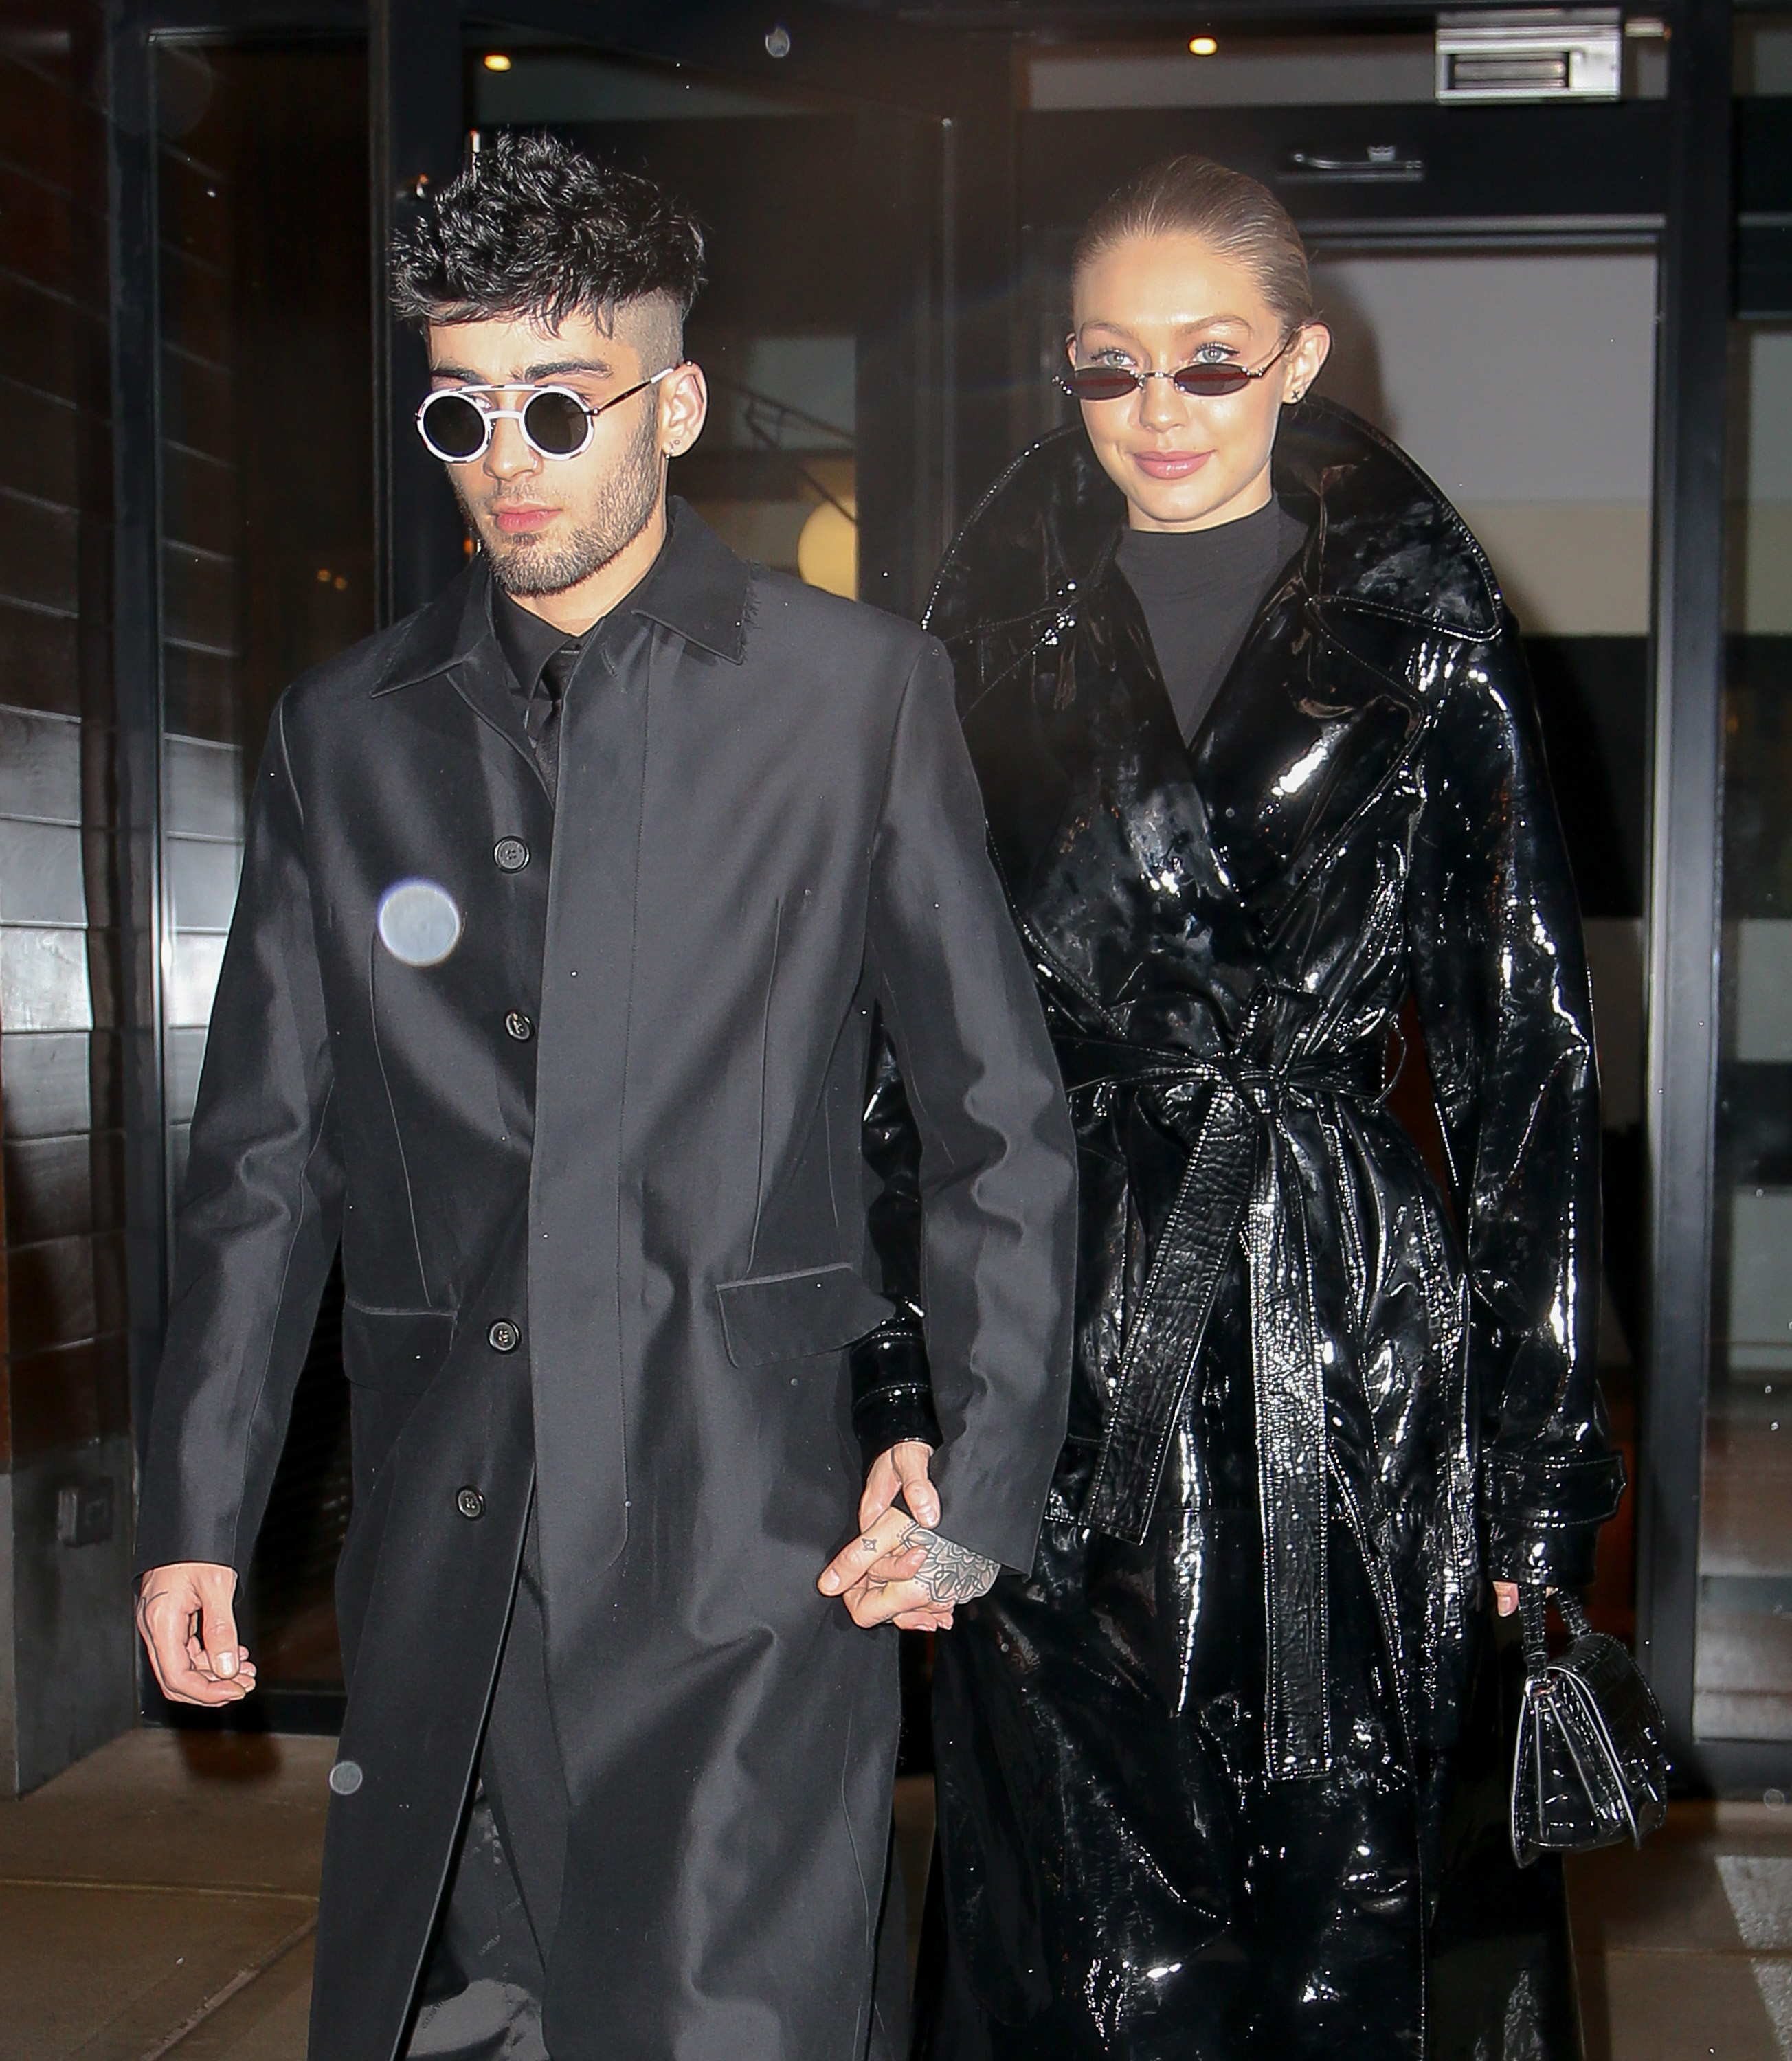 Zayn Malik and Gigi Hadid look amazing in this different shade of black outfits, while holding hands.